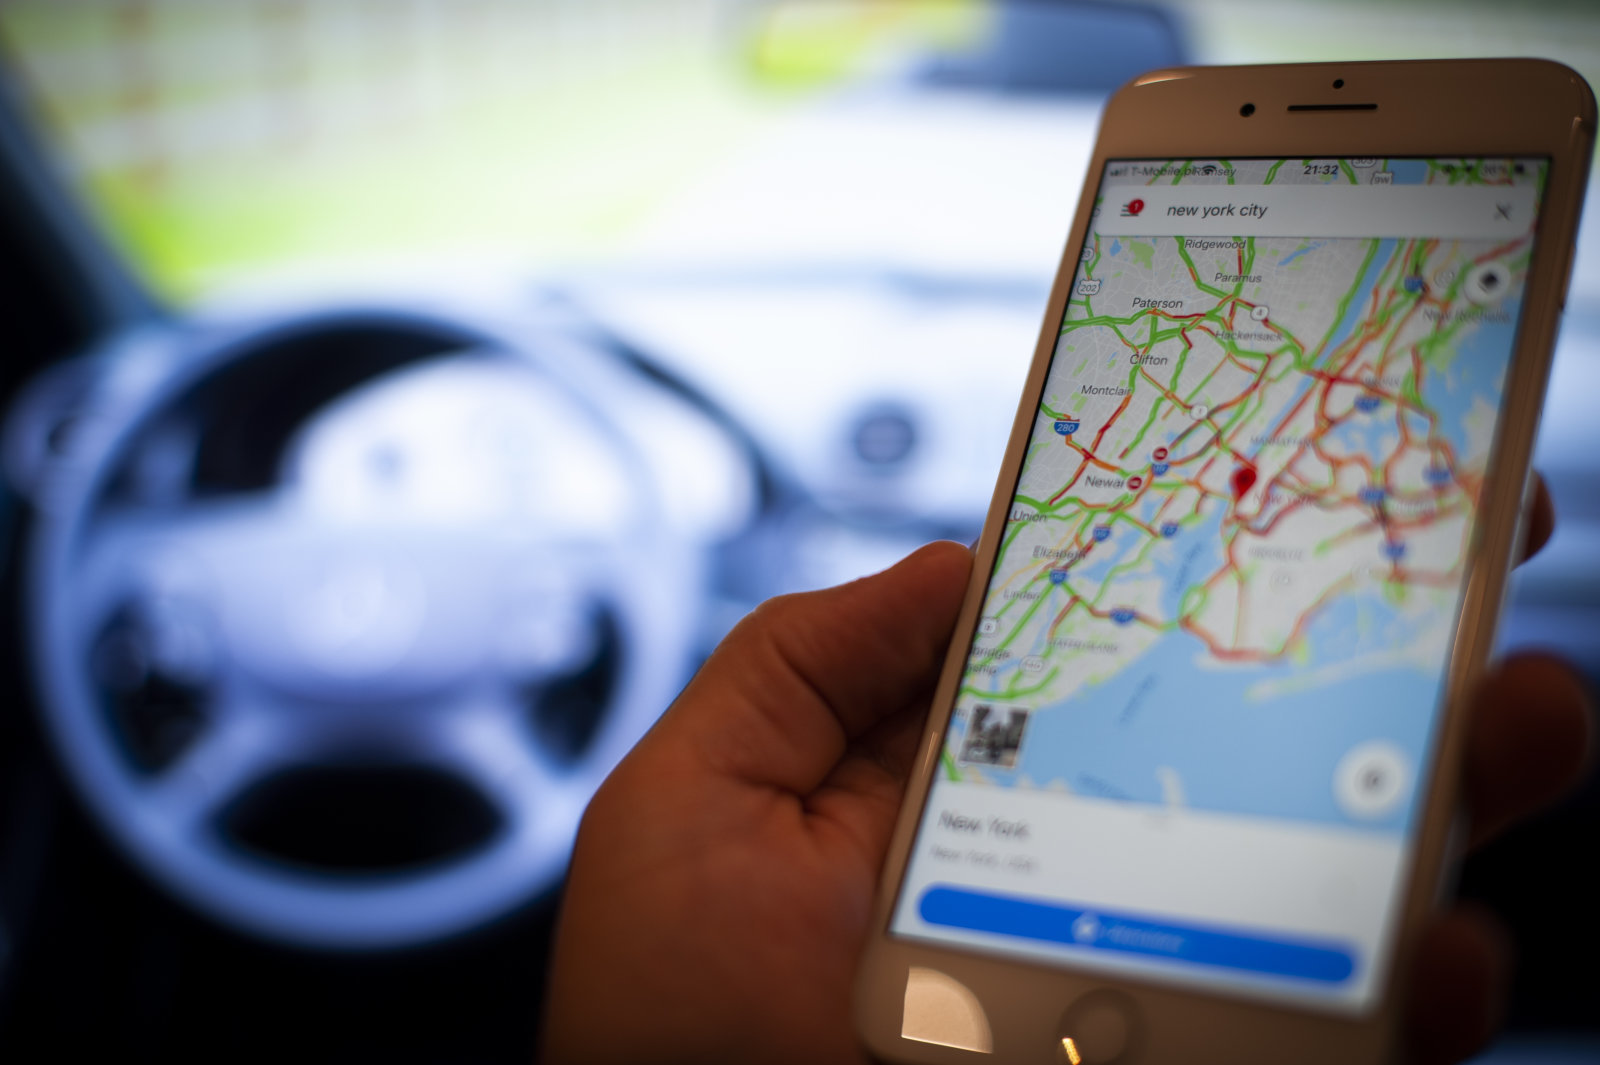 A mobile phone with the Google Maps application is seen in this photo illustration on September 18, 2018. Google is set to partner with the worlds largest car manufacturing group Renault-Nissan-Mistubishi to provide its Android operating system for media screens in their vehicles. (Photo by Jaap Arriens/NurPhoto via Getty Images)